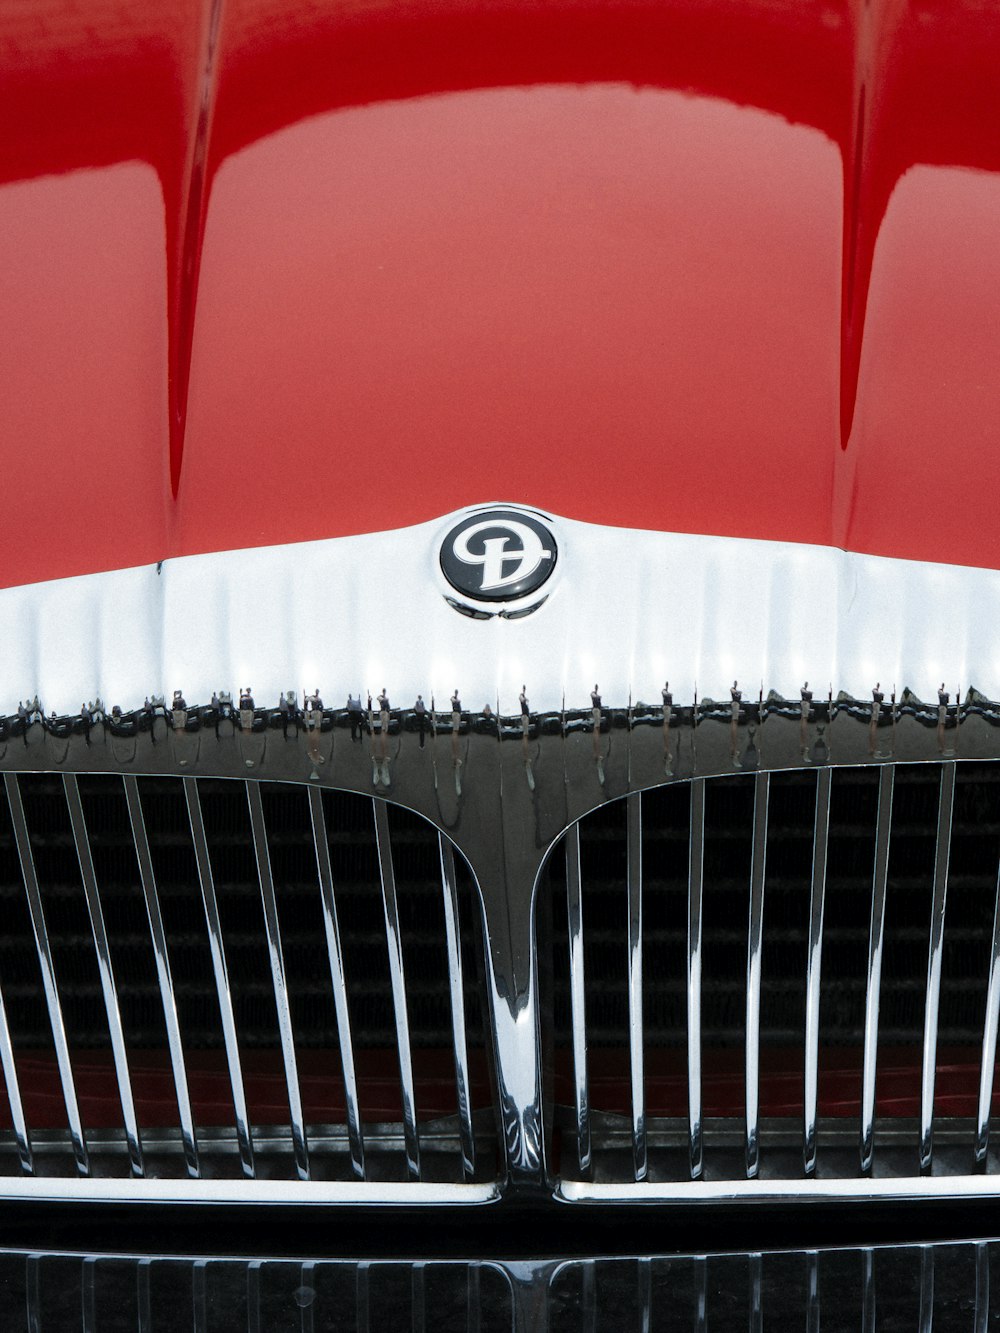 a close up of the front grill of a red car